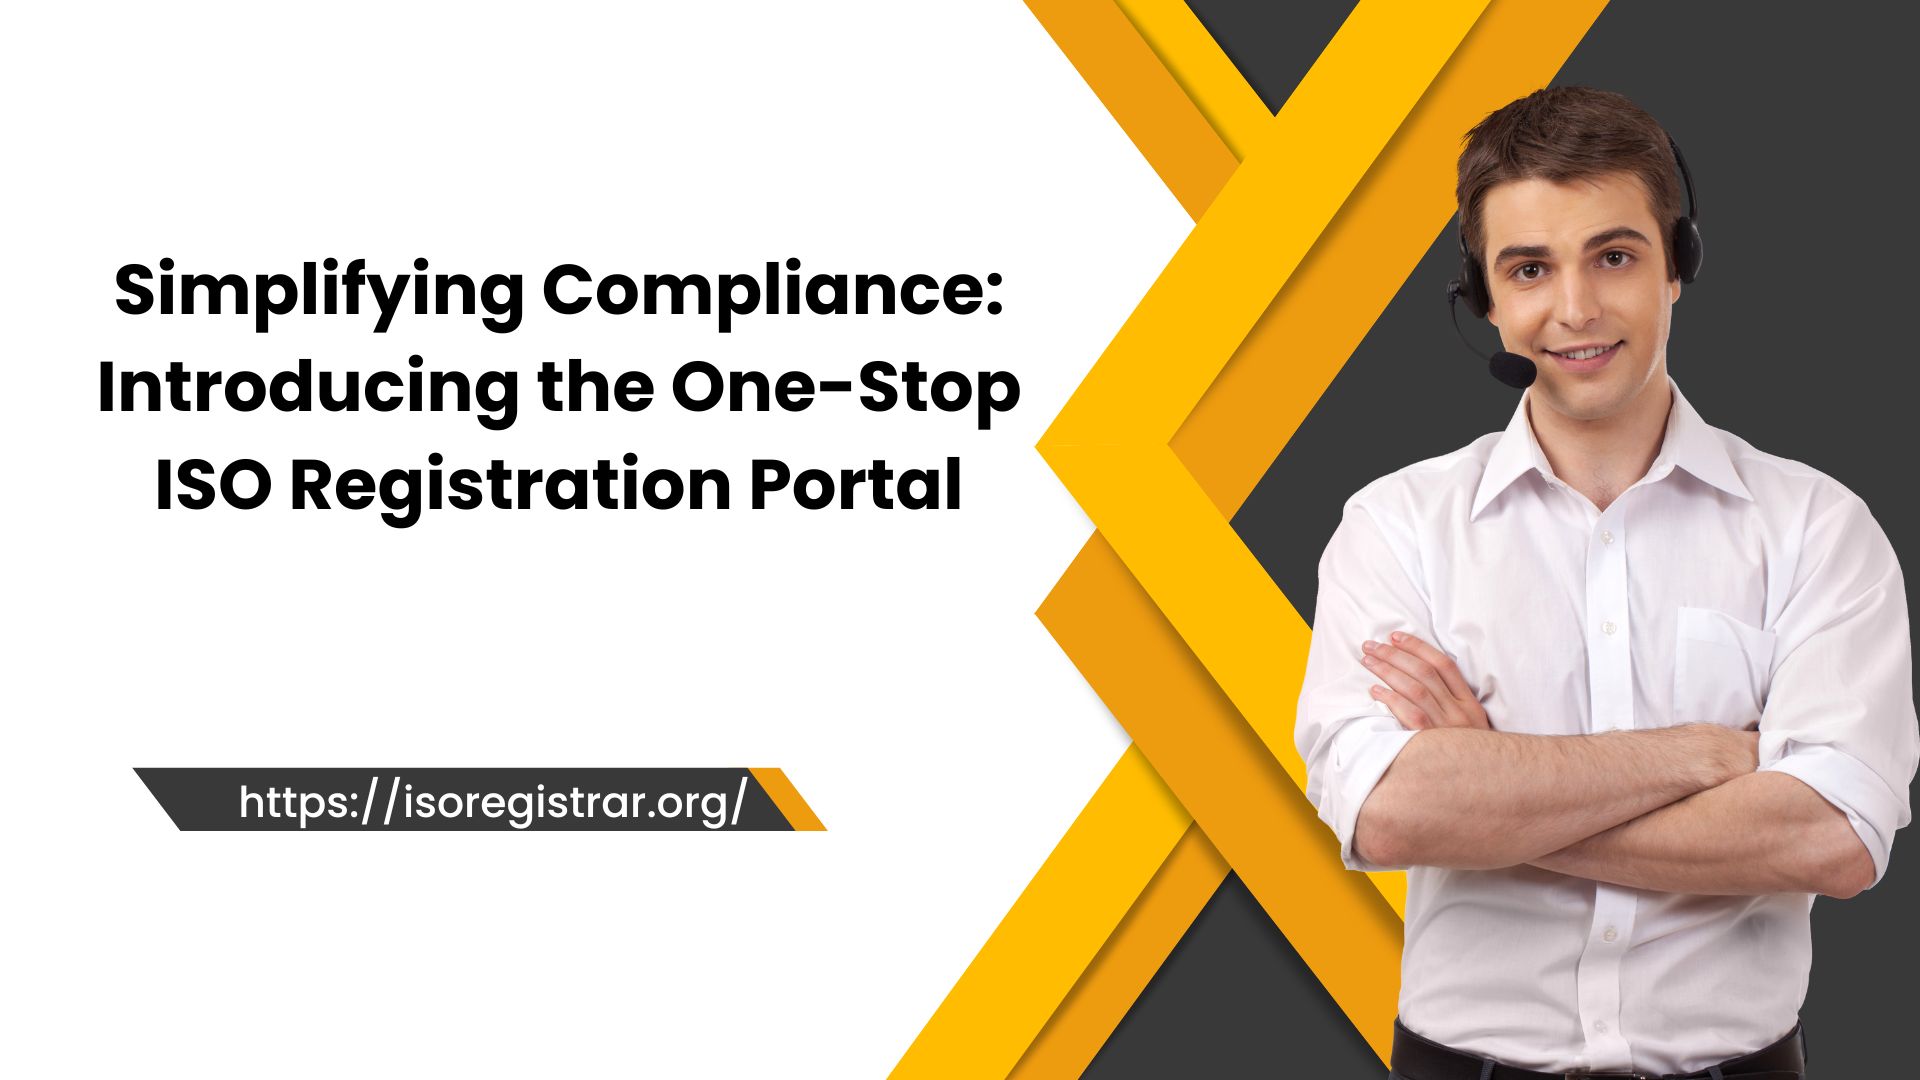 Simplifying Compliance: Introducing the One-Stop ISO Registration Portal